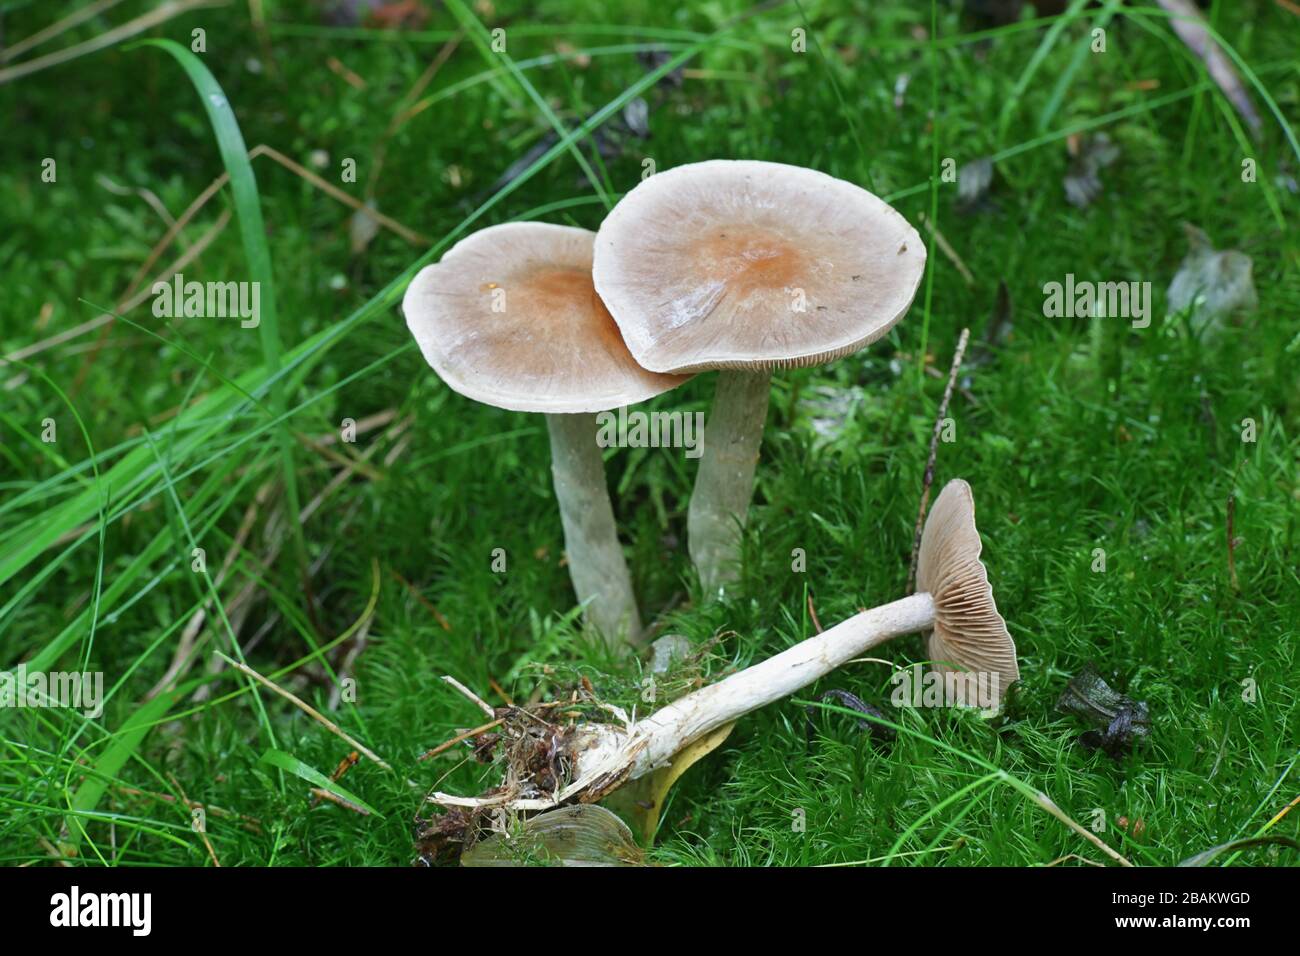 Hebeloma mesophaeum, known as  veiled poisonpie or poison pie, wild mushroom from Finland Stock Photo